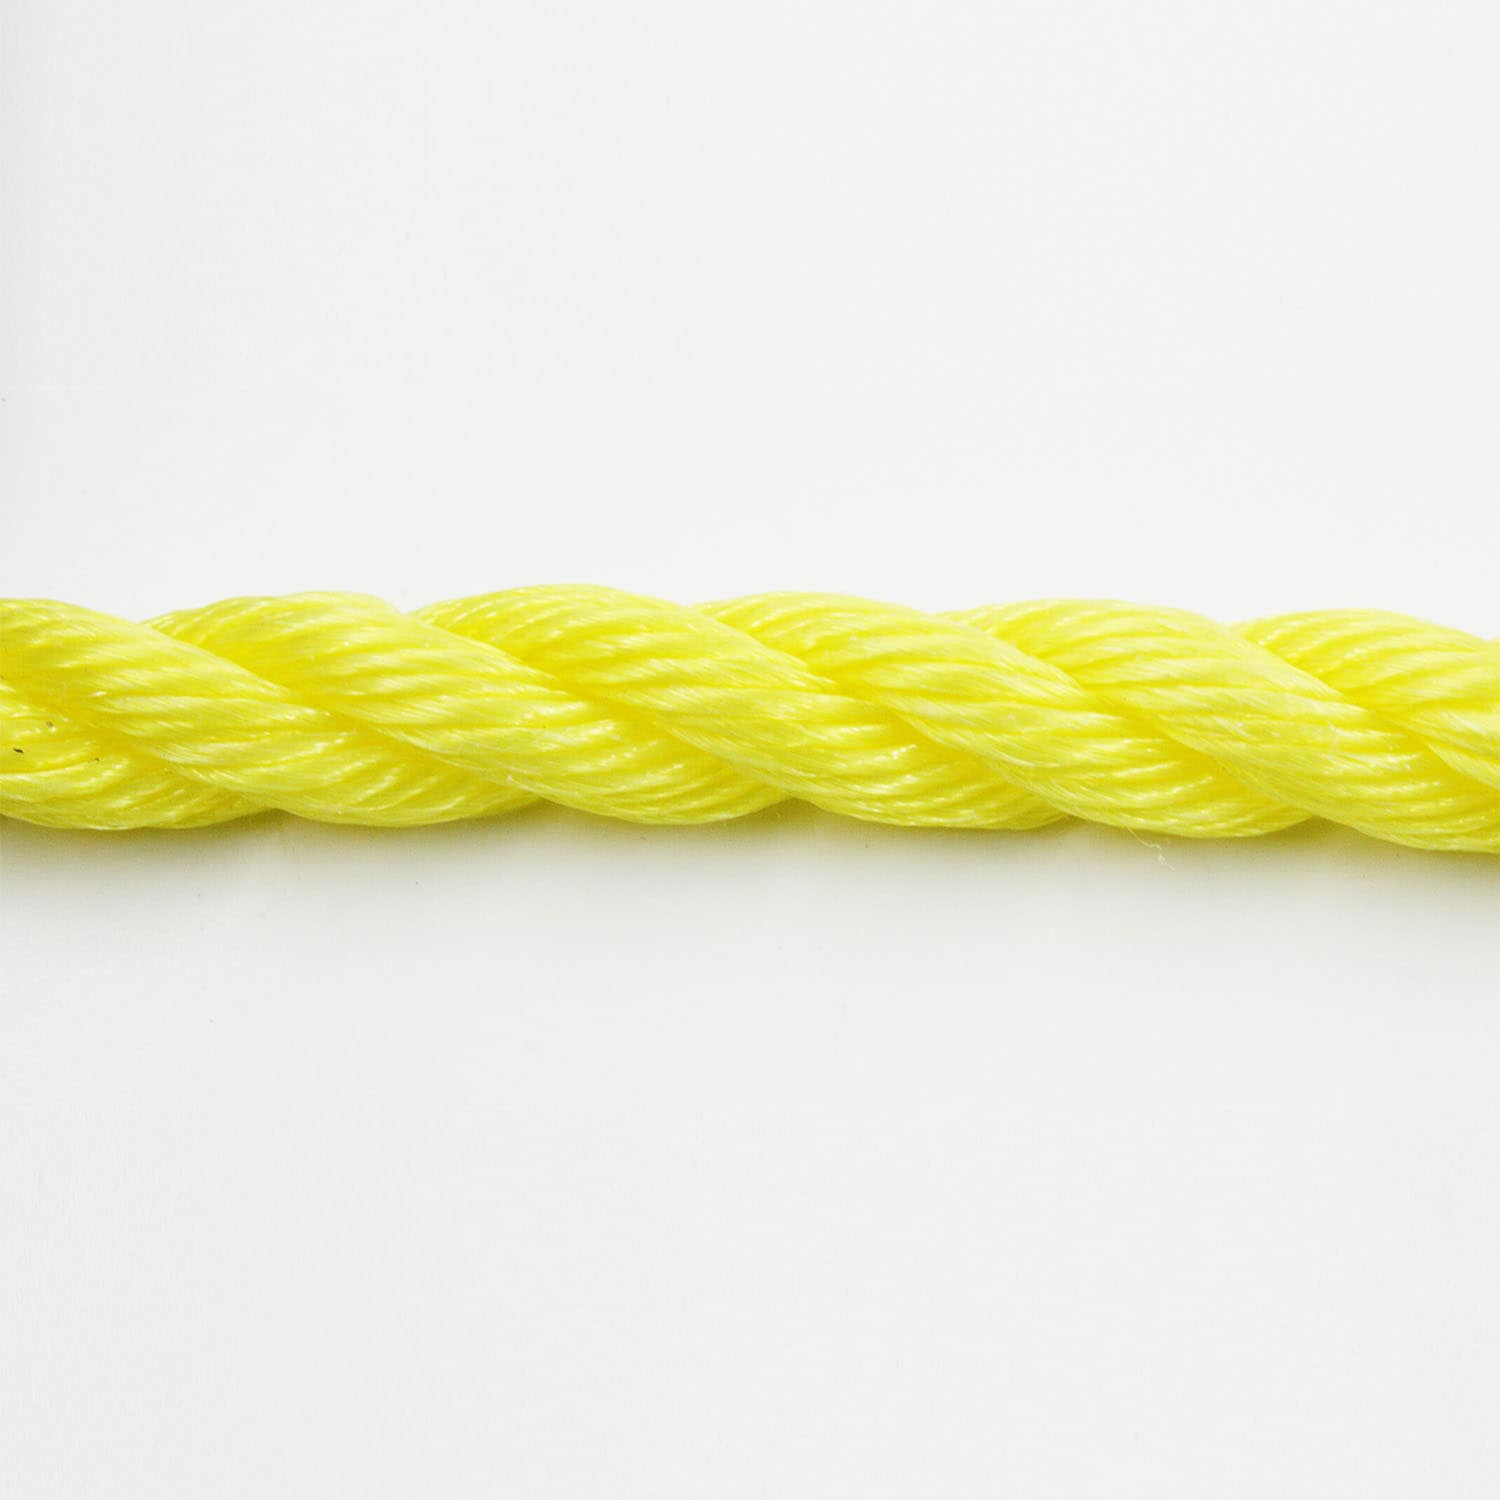 Mibro 3/4 in. x 150 ft. KingCord Yellow Twisted Polypropylene Rope